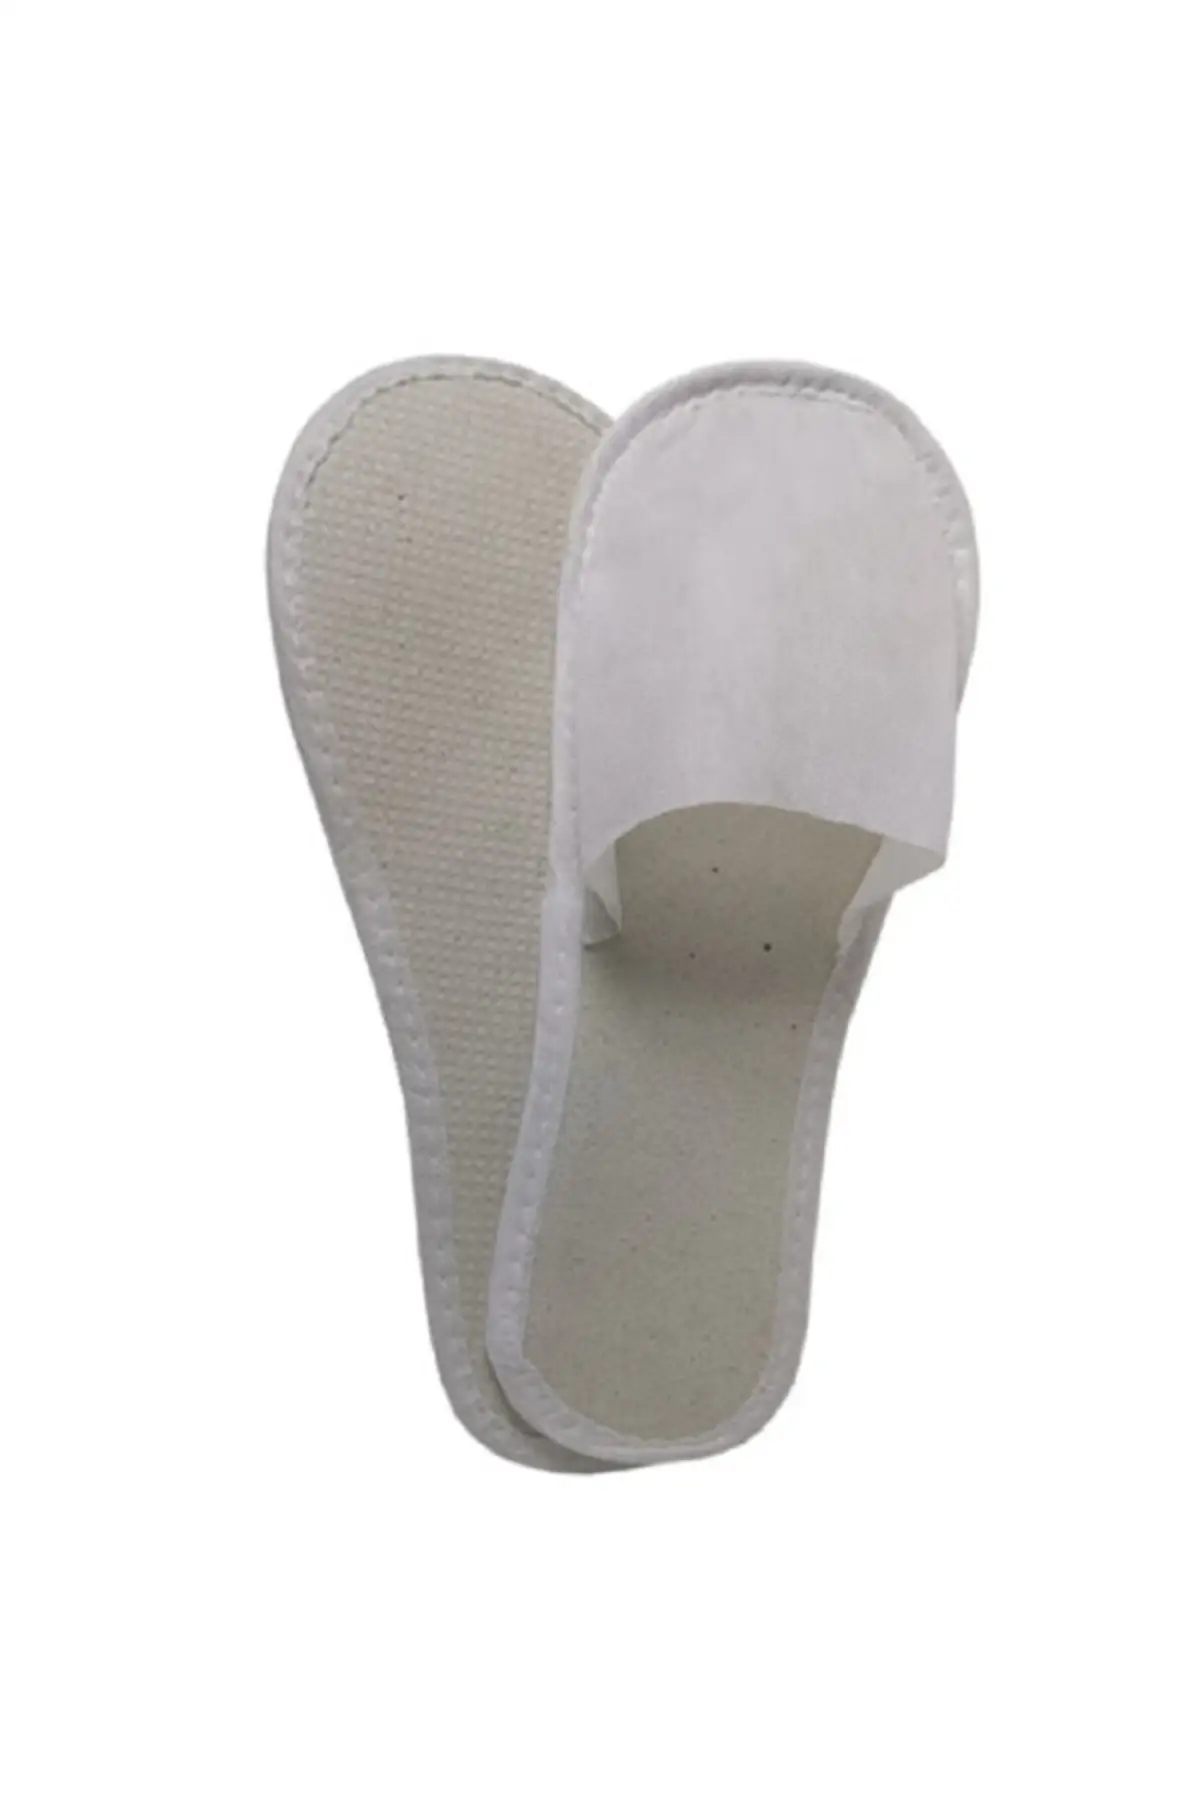 

Disposable Hotel Slippers Bare Sole Interlining 100 Pack Single Use